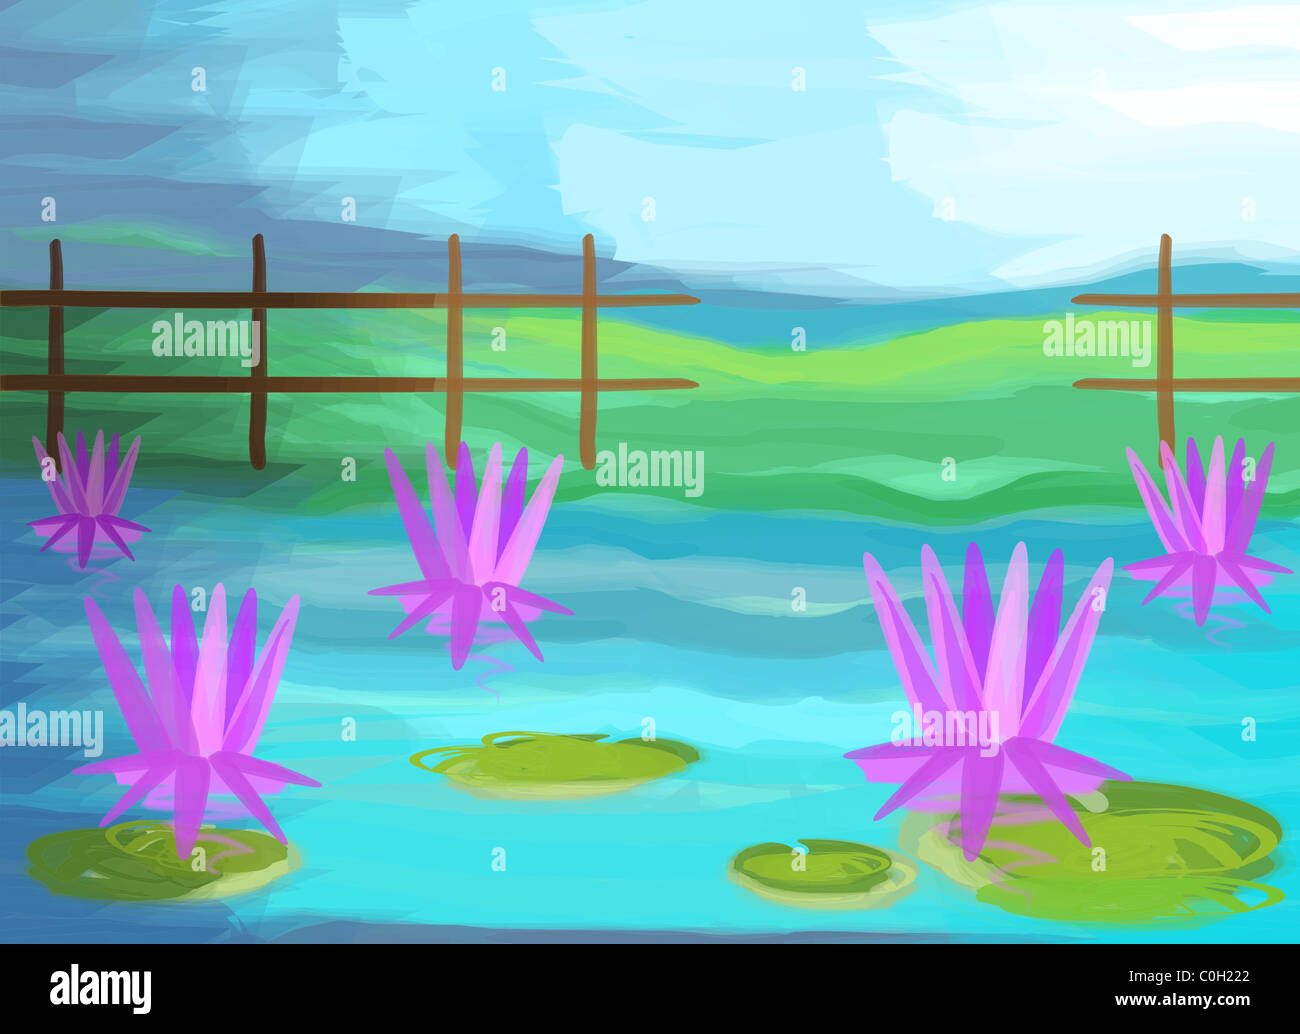 Digital painting of lotus. The artist is enjoying the beauty of lotus flowers in the pond and the surrounding atmosphere. Stock Photo